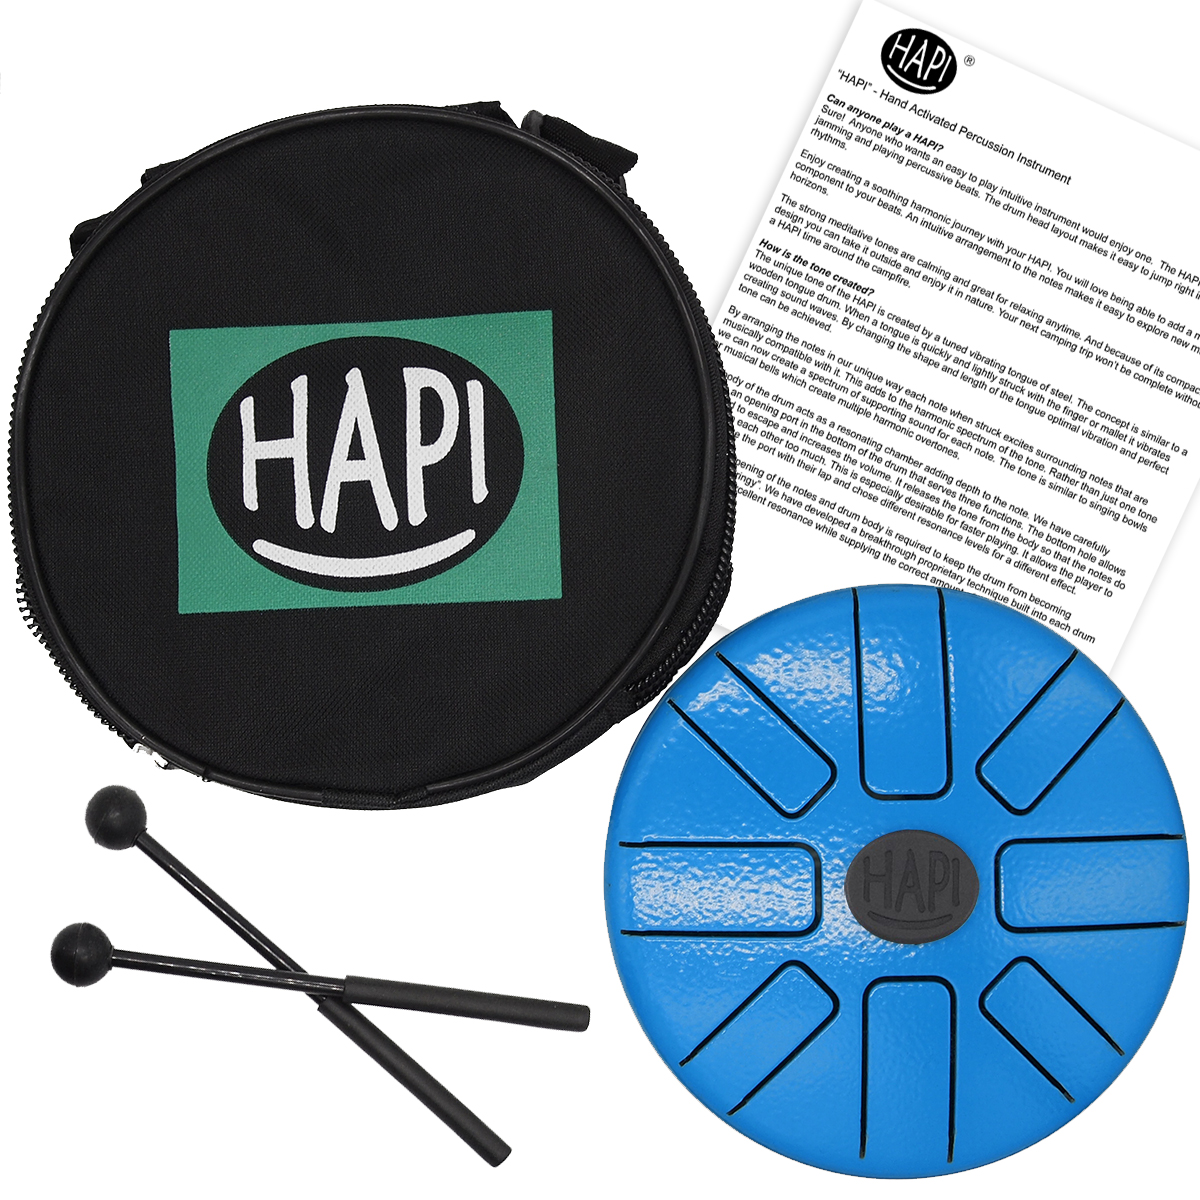 HAPI Drum Steel Tongue Drum Percussion Play Along Tini Accessories